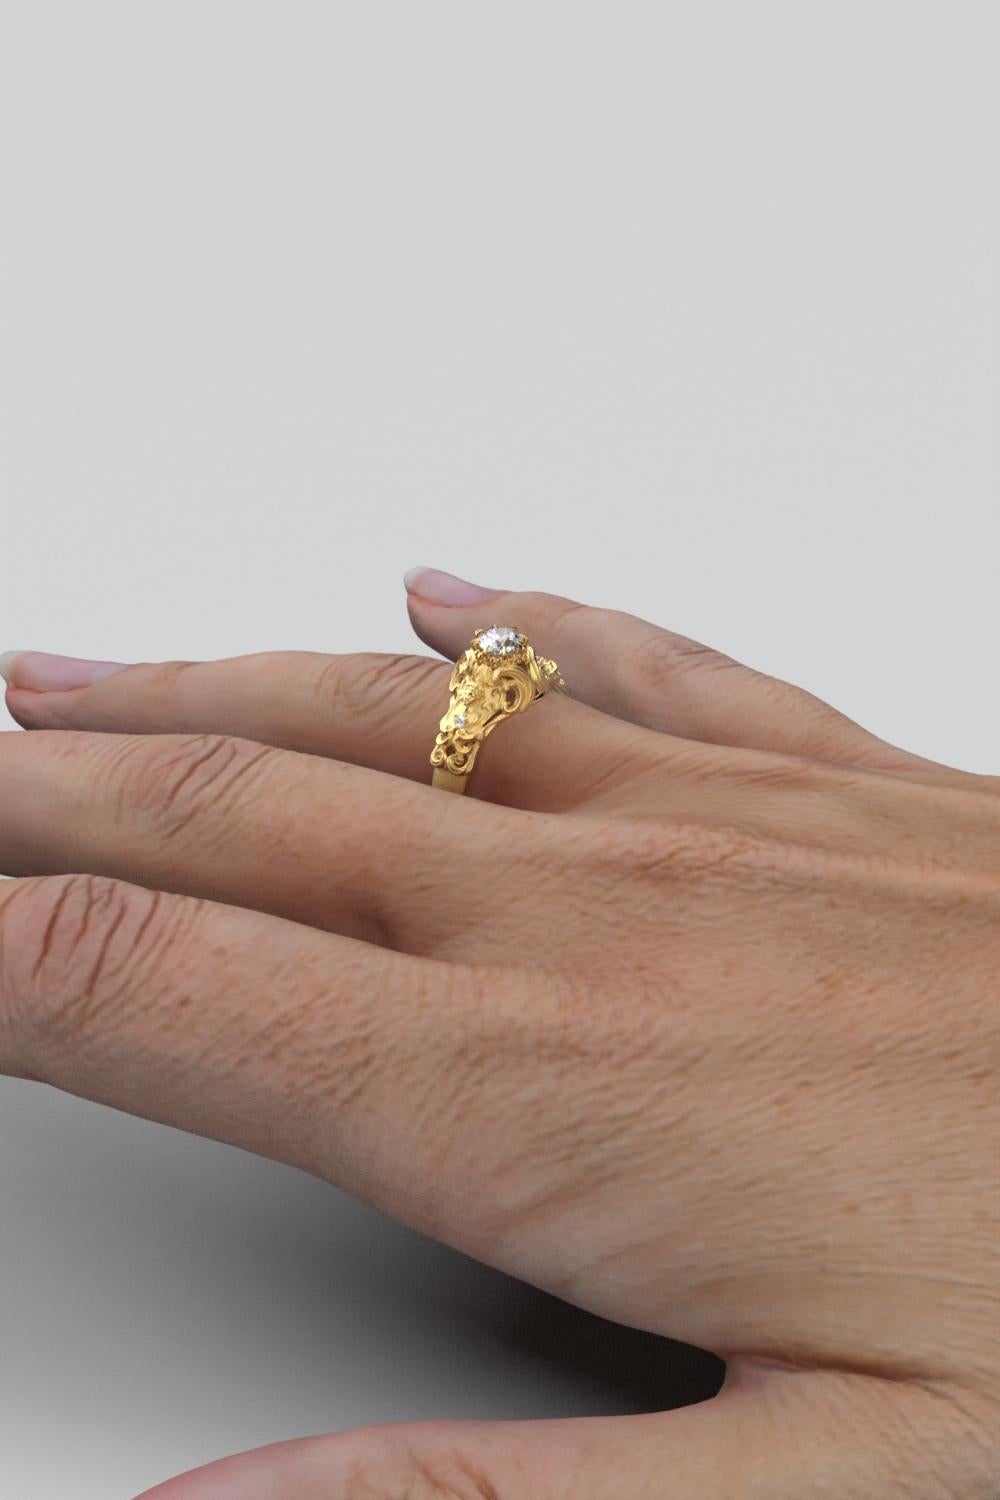 For Sale:  14k Gold Diamond Ring by Oltremare Gioielli in Italian Renaissance Style 5